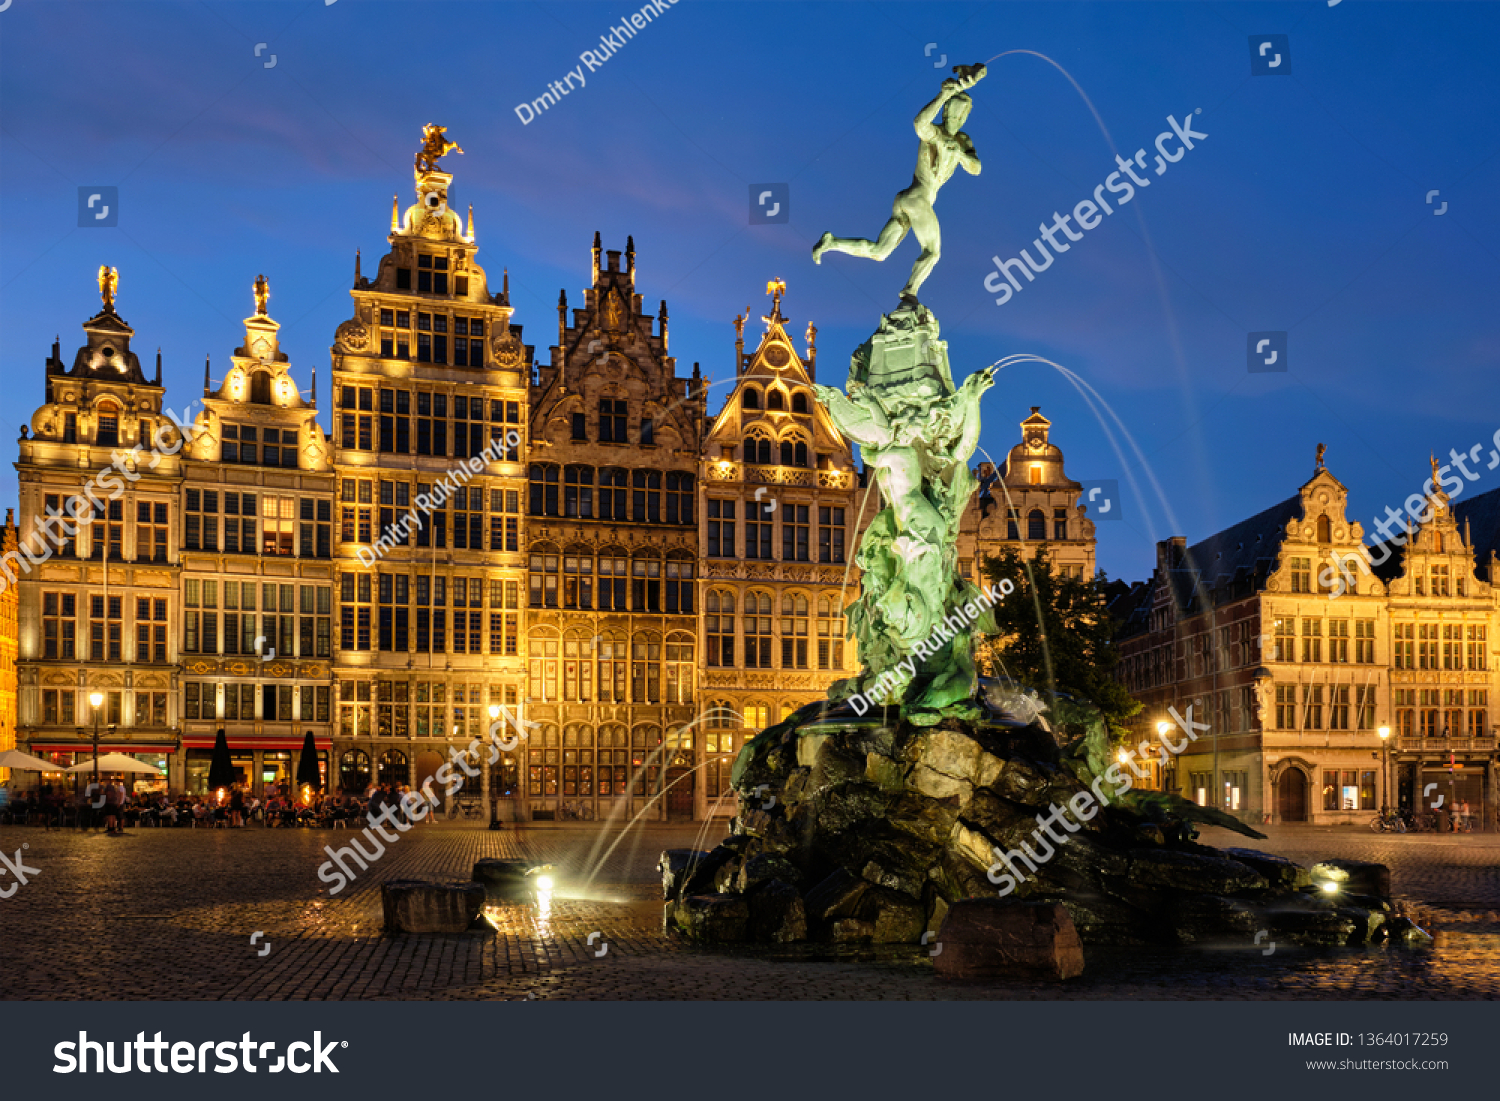 Antwerp famous Brabo statue and fountain on Grote Markt square illuminated at night and old houses. Antwerp, Belgium #1364017259